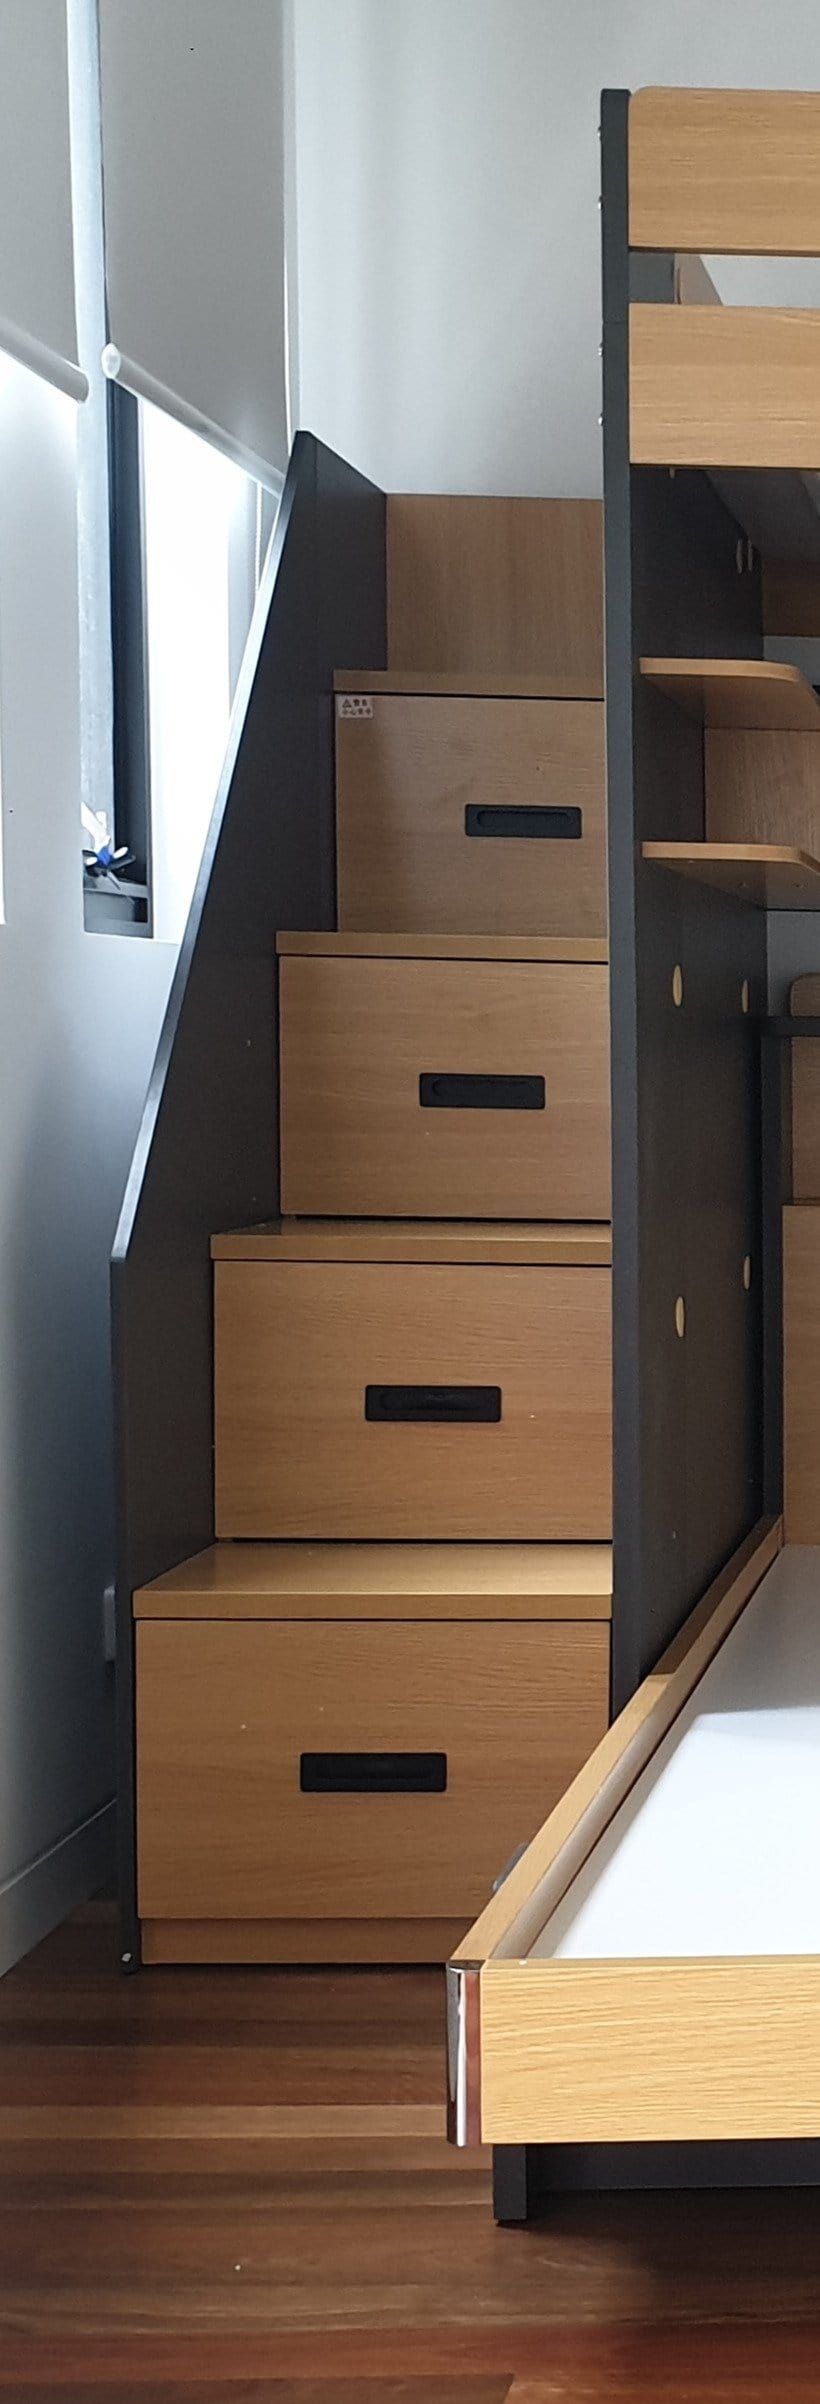 EzSpace Stair TEOM Stair  | Modern Bunk & Loft Beds for Small Bedrooms | EzSpace Available for immediate dispatch